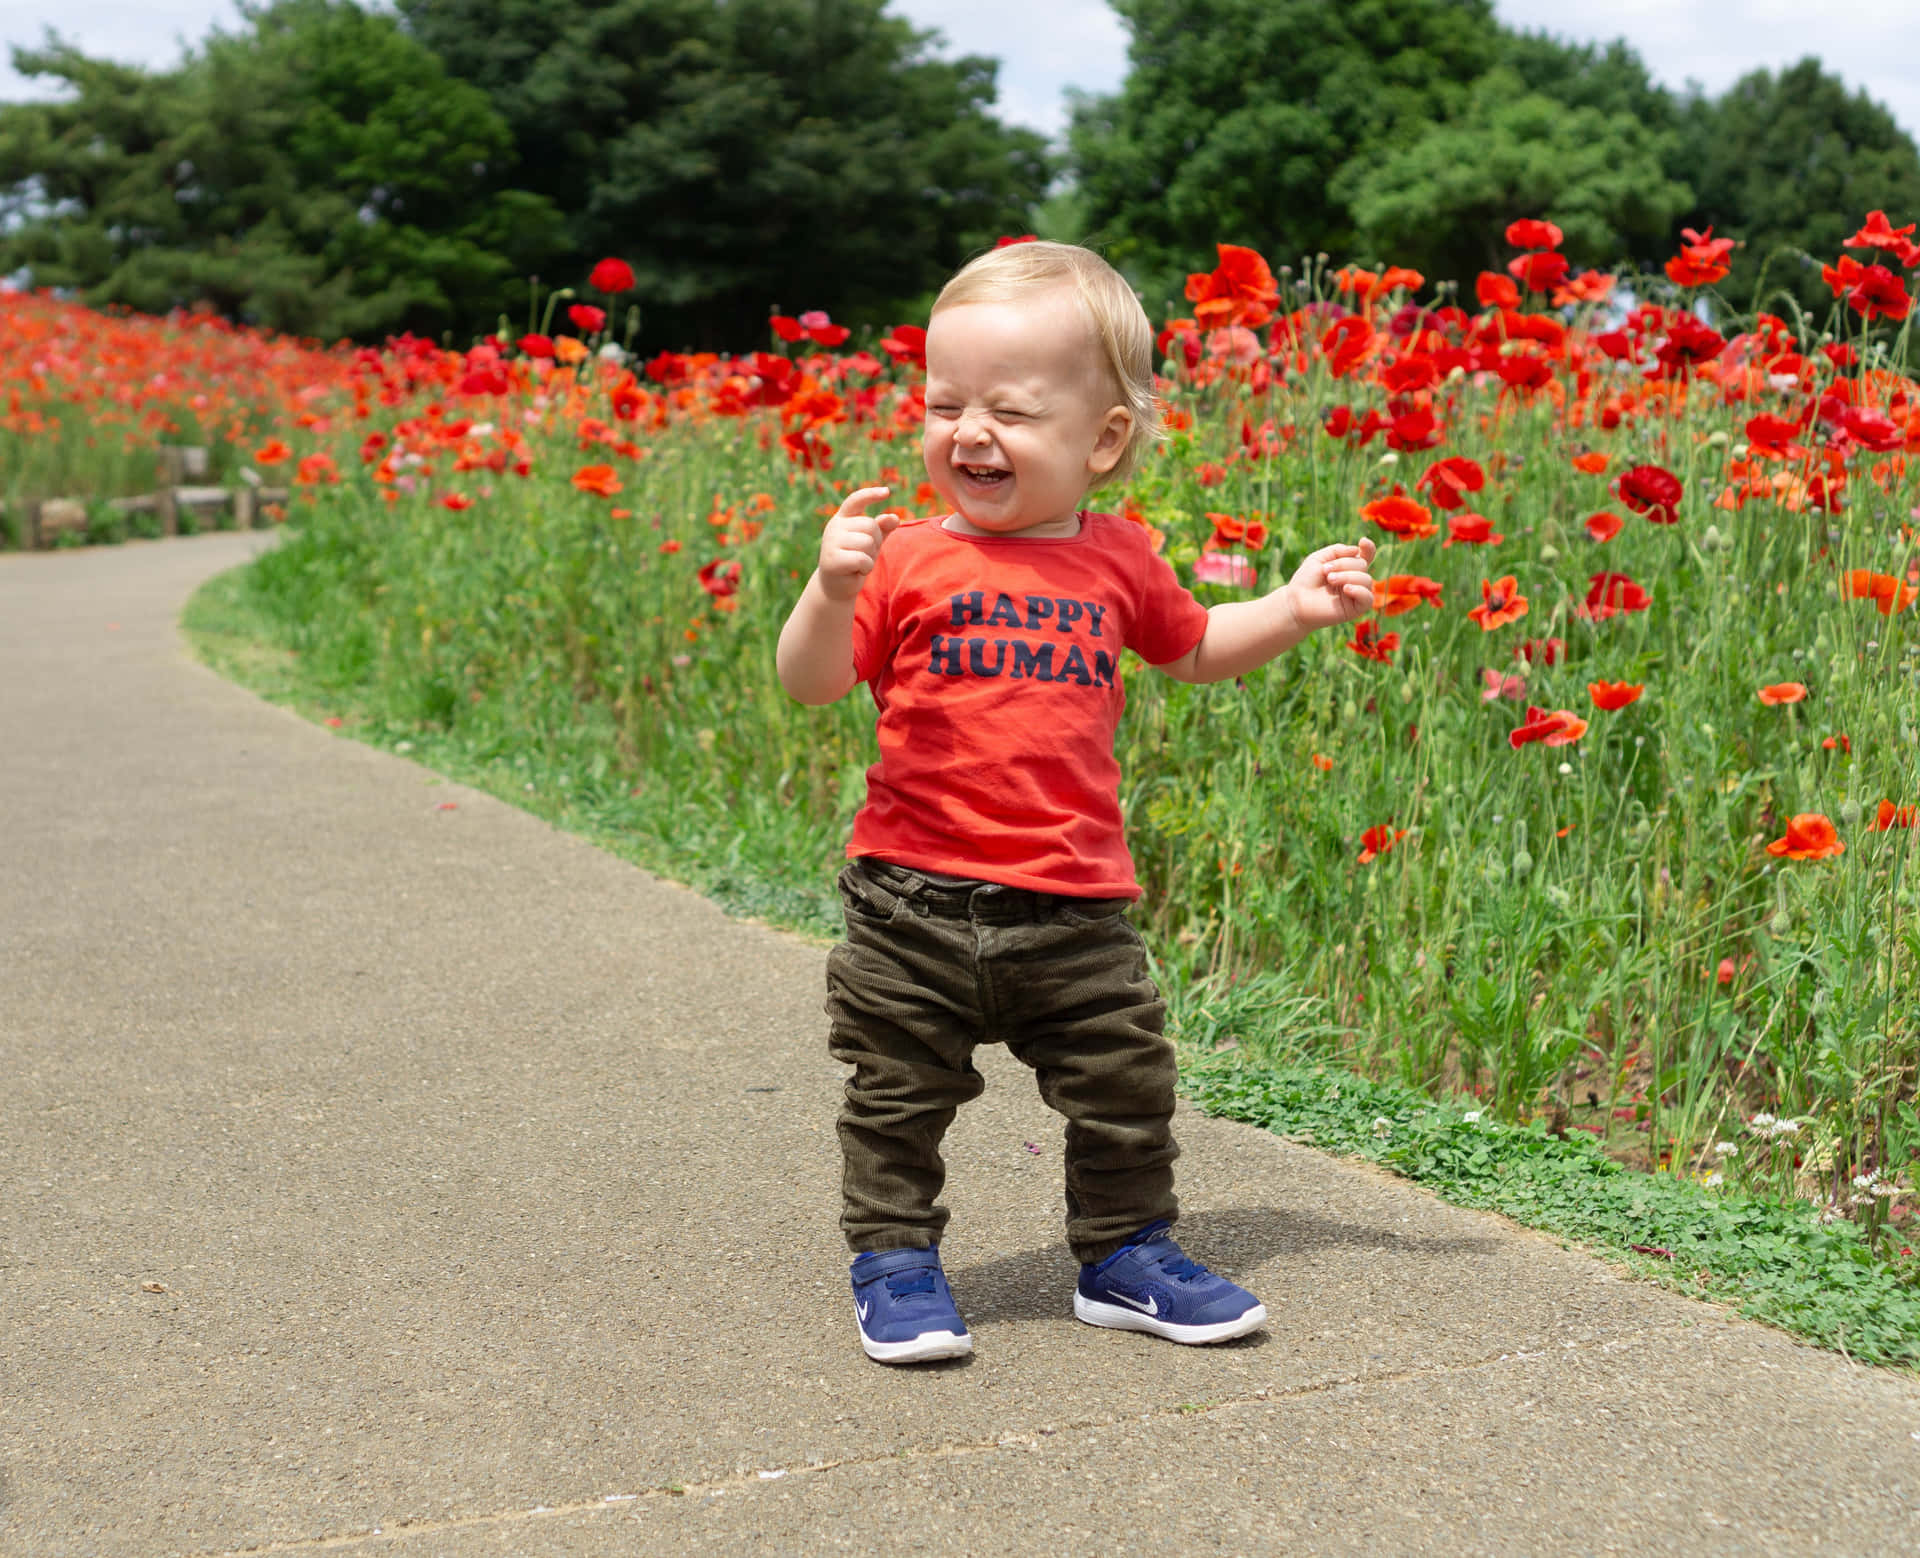 A Child Is Standing In A Field Of Flowers